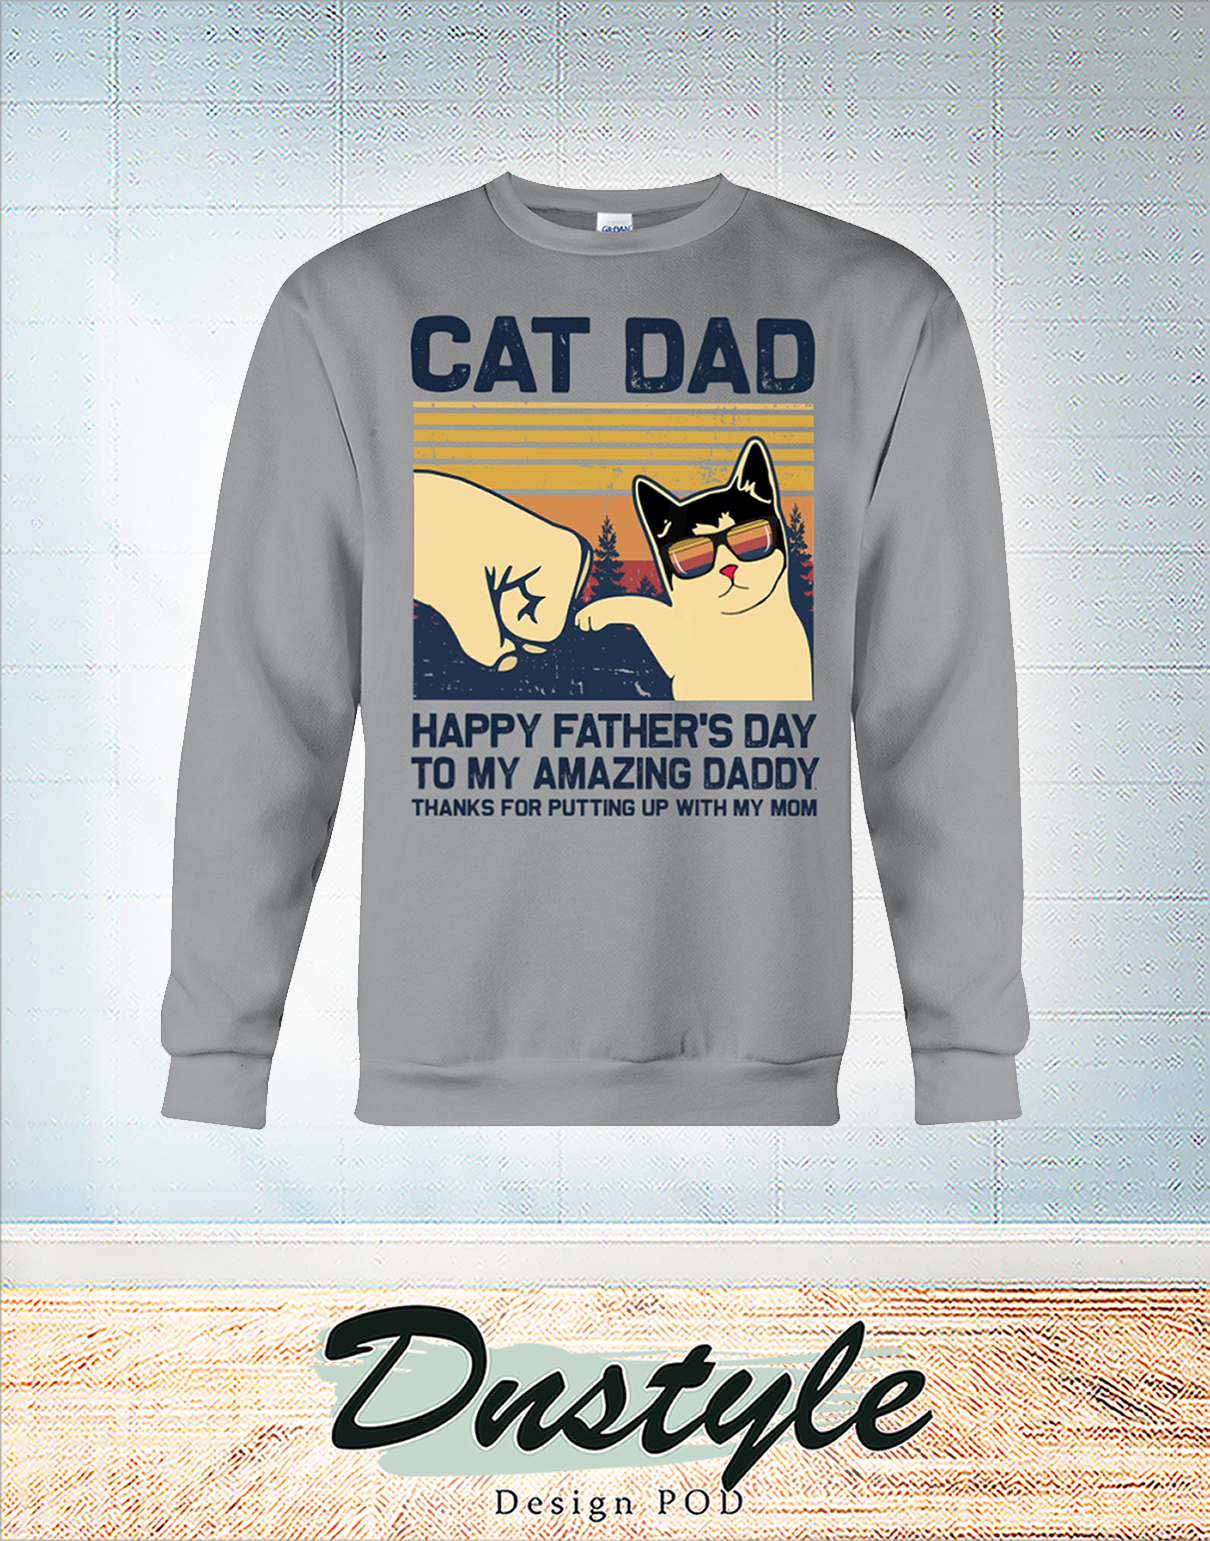 Vintage Cat dad happy father's day to amazing daddy sweatshirt